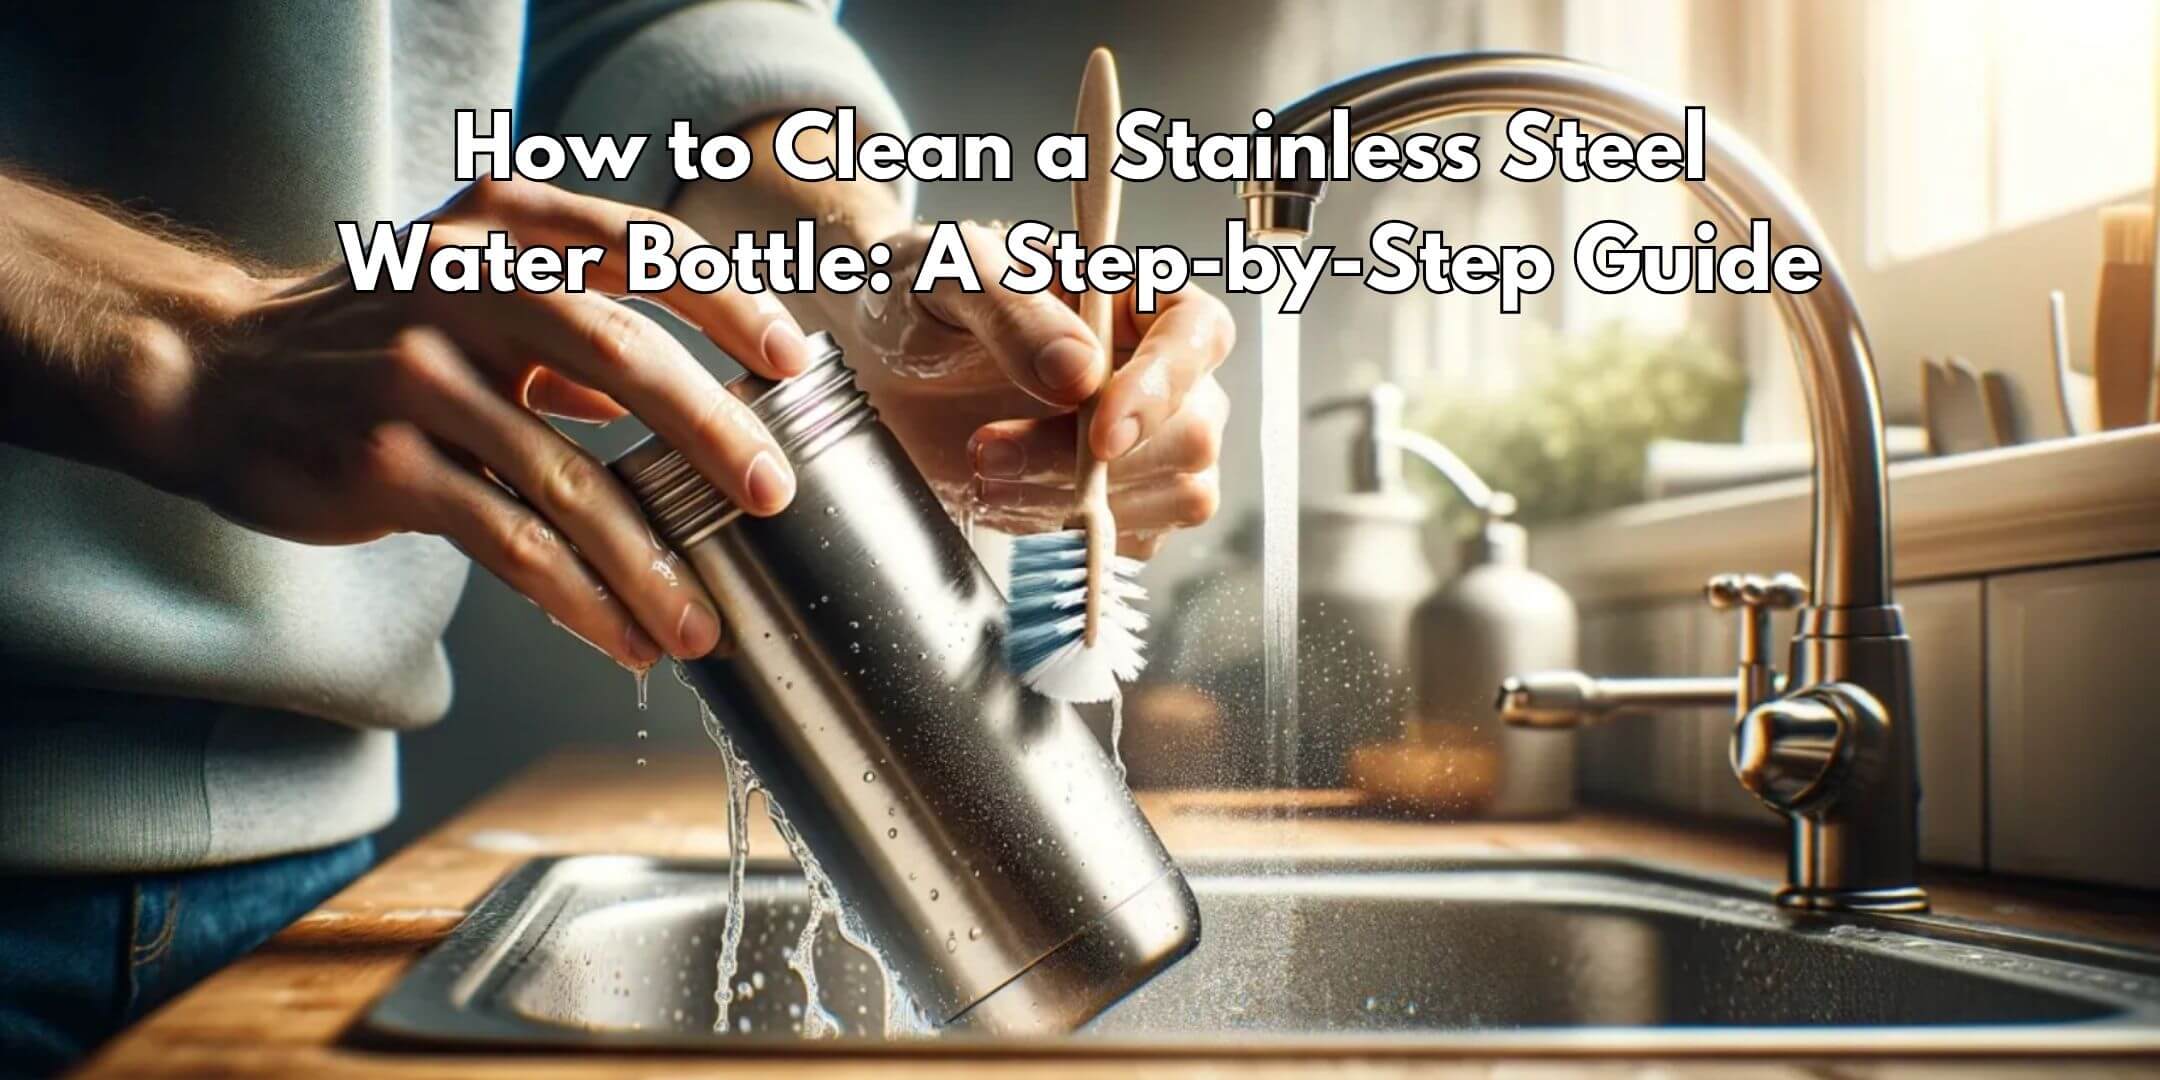 How to Clean a Stainless Steel Water Bottle - A Step-by-Step Guide